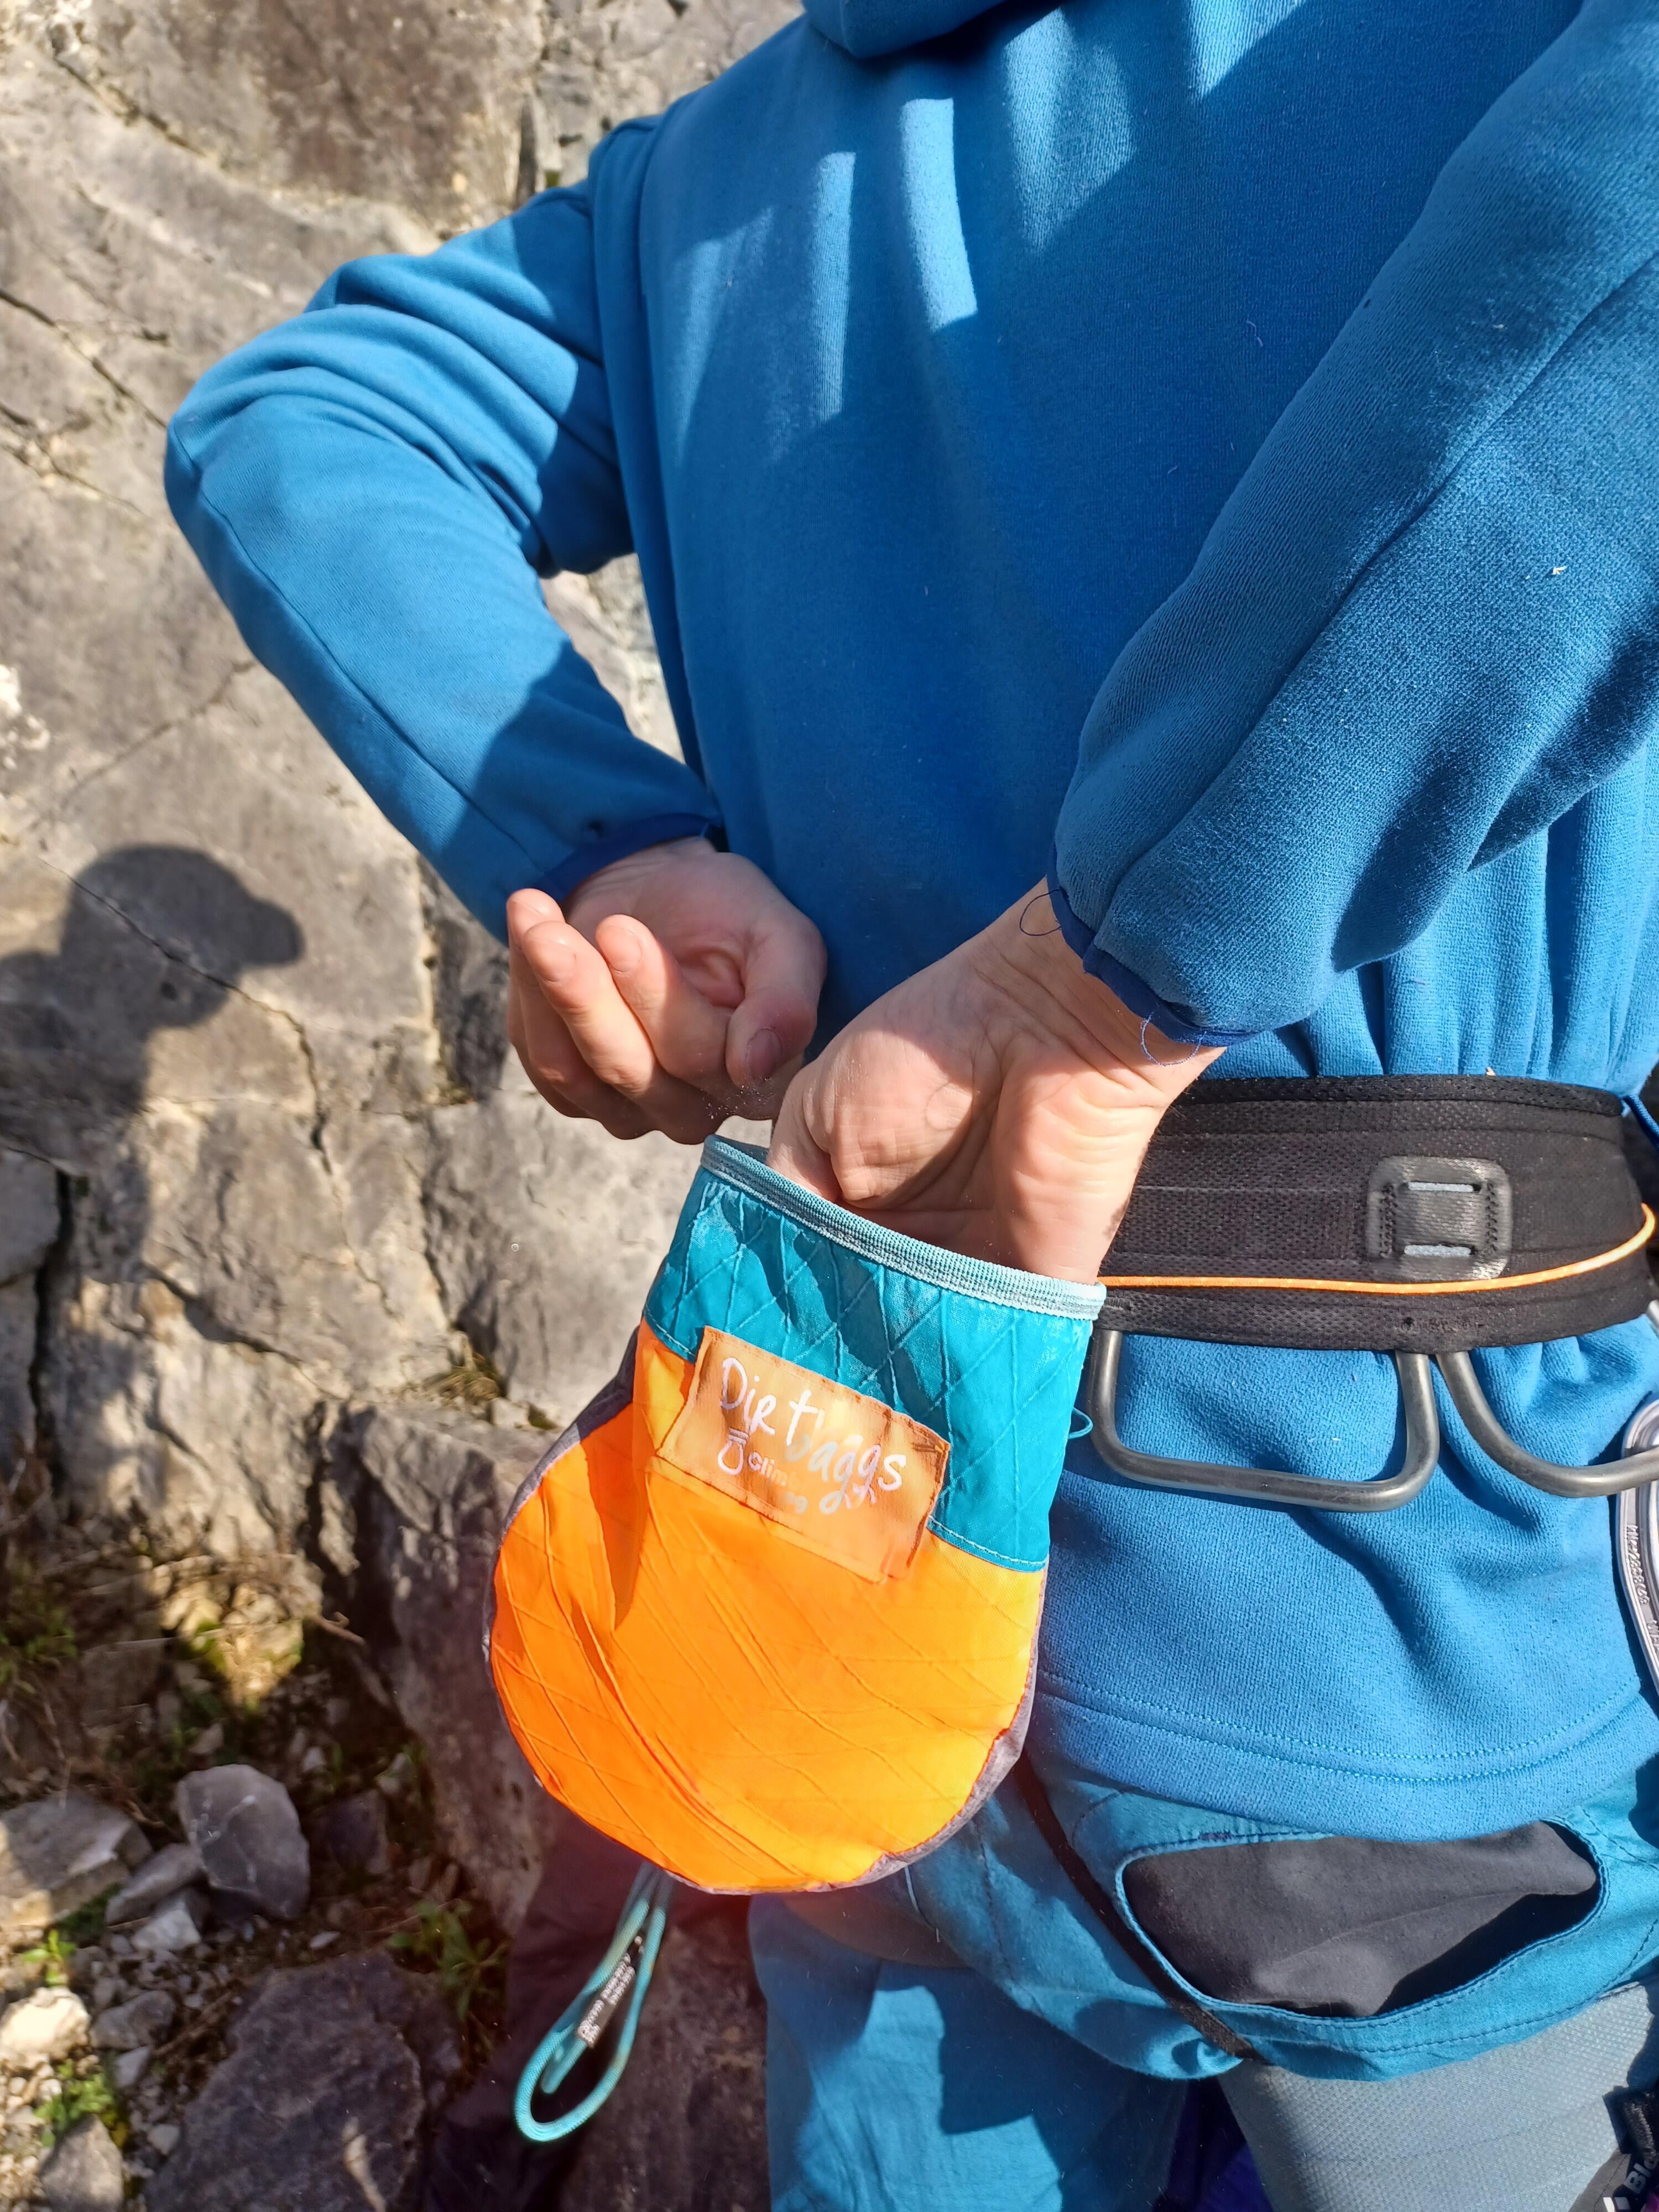 Upcycled fabric climbing chalk bag made in the UK 4/4